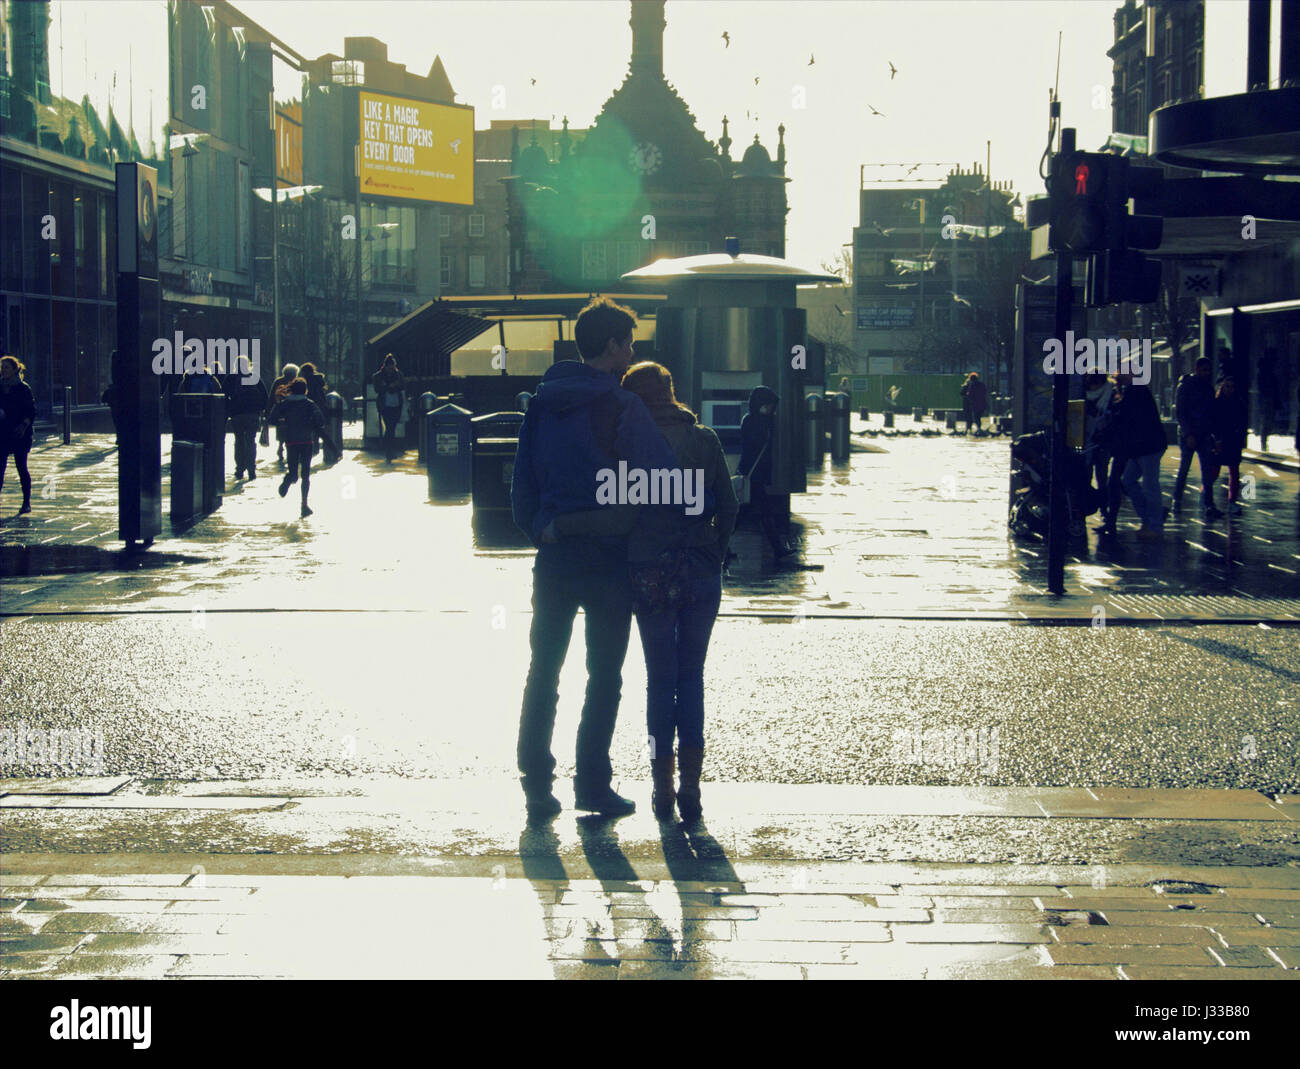 young couple urban style silhouette trendy hipster Glasgow walking holding hands together Stock Photo